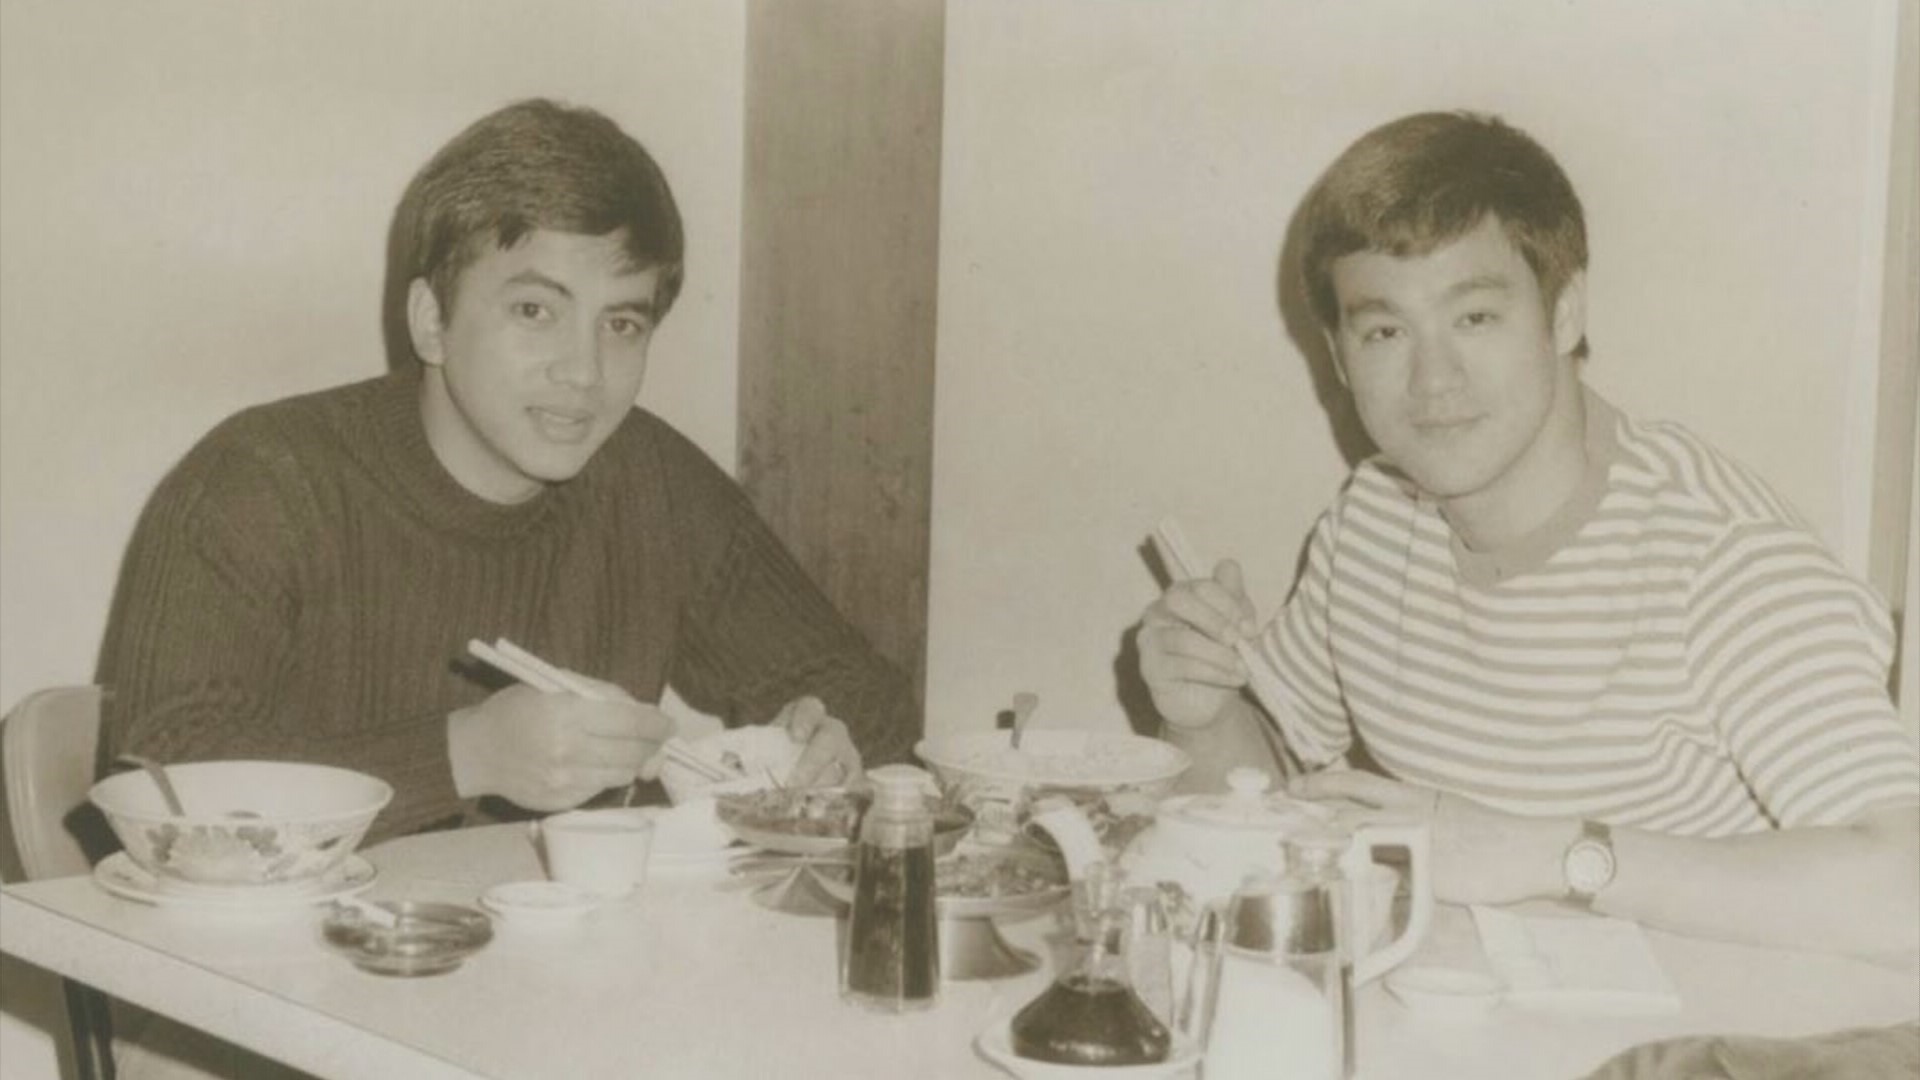 Tai Tung Restaurant claims to be Seattle’s oldest Chinese restaurant in continuous operation. The restaurant opened in 1935 and has five generations of customers. Here are some fun facts about Tai Tung, Bruce Lee’s favorite Seattle restaurant.